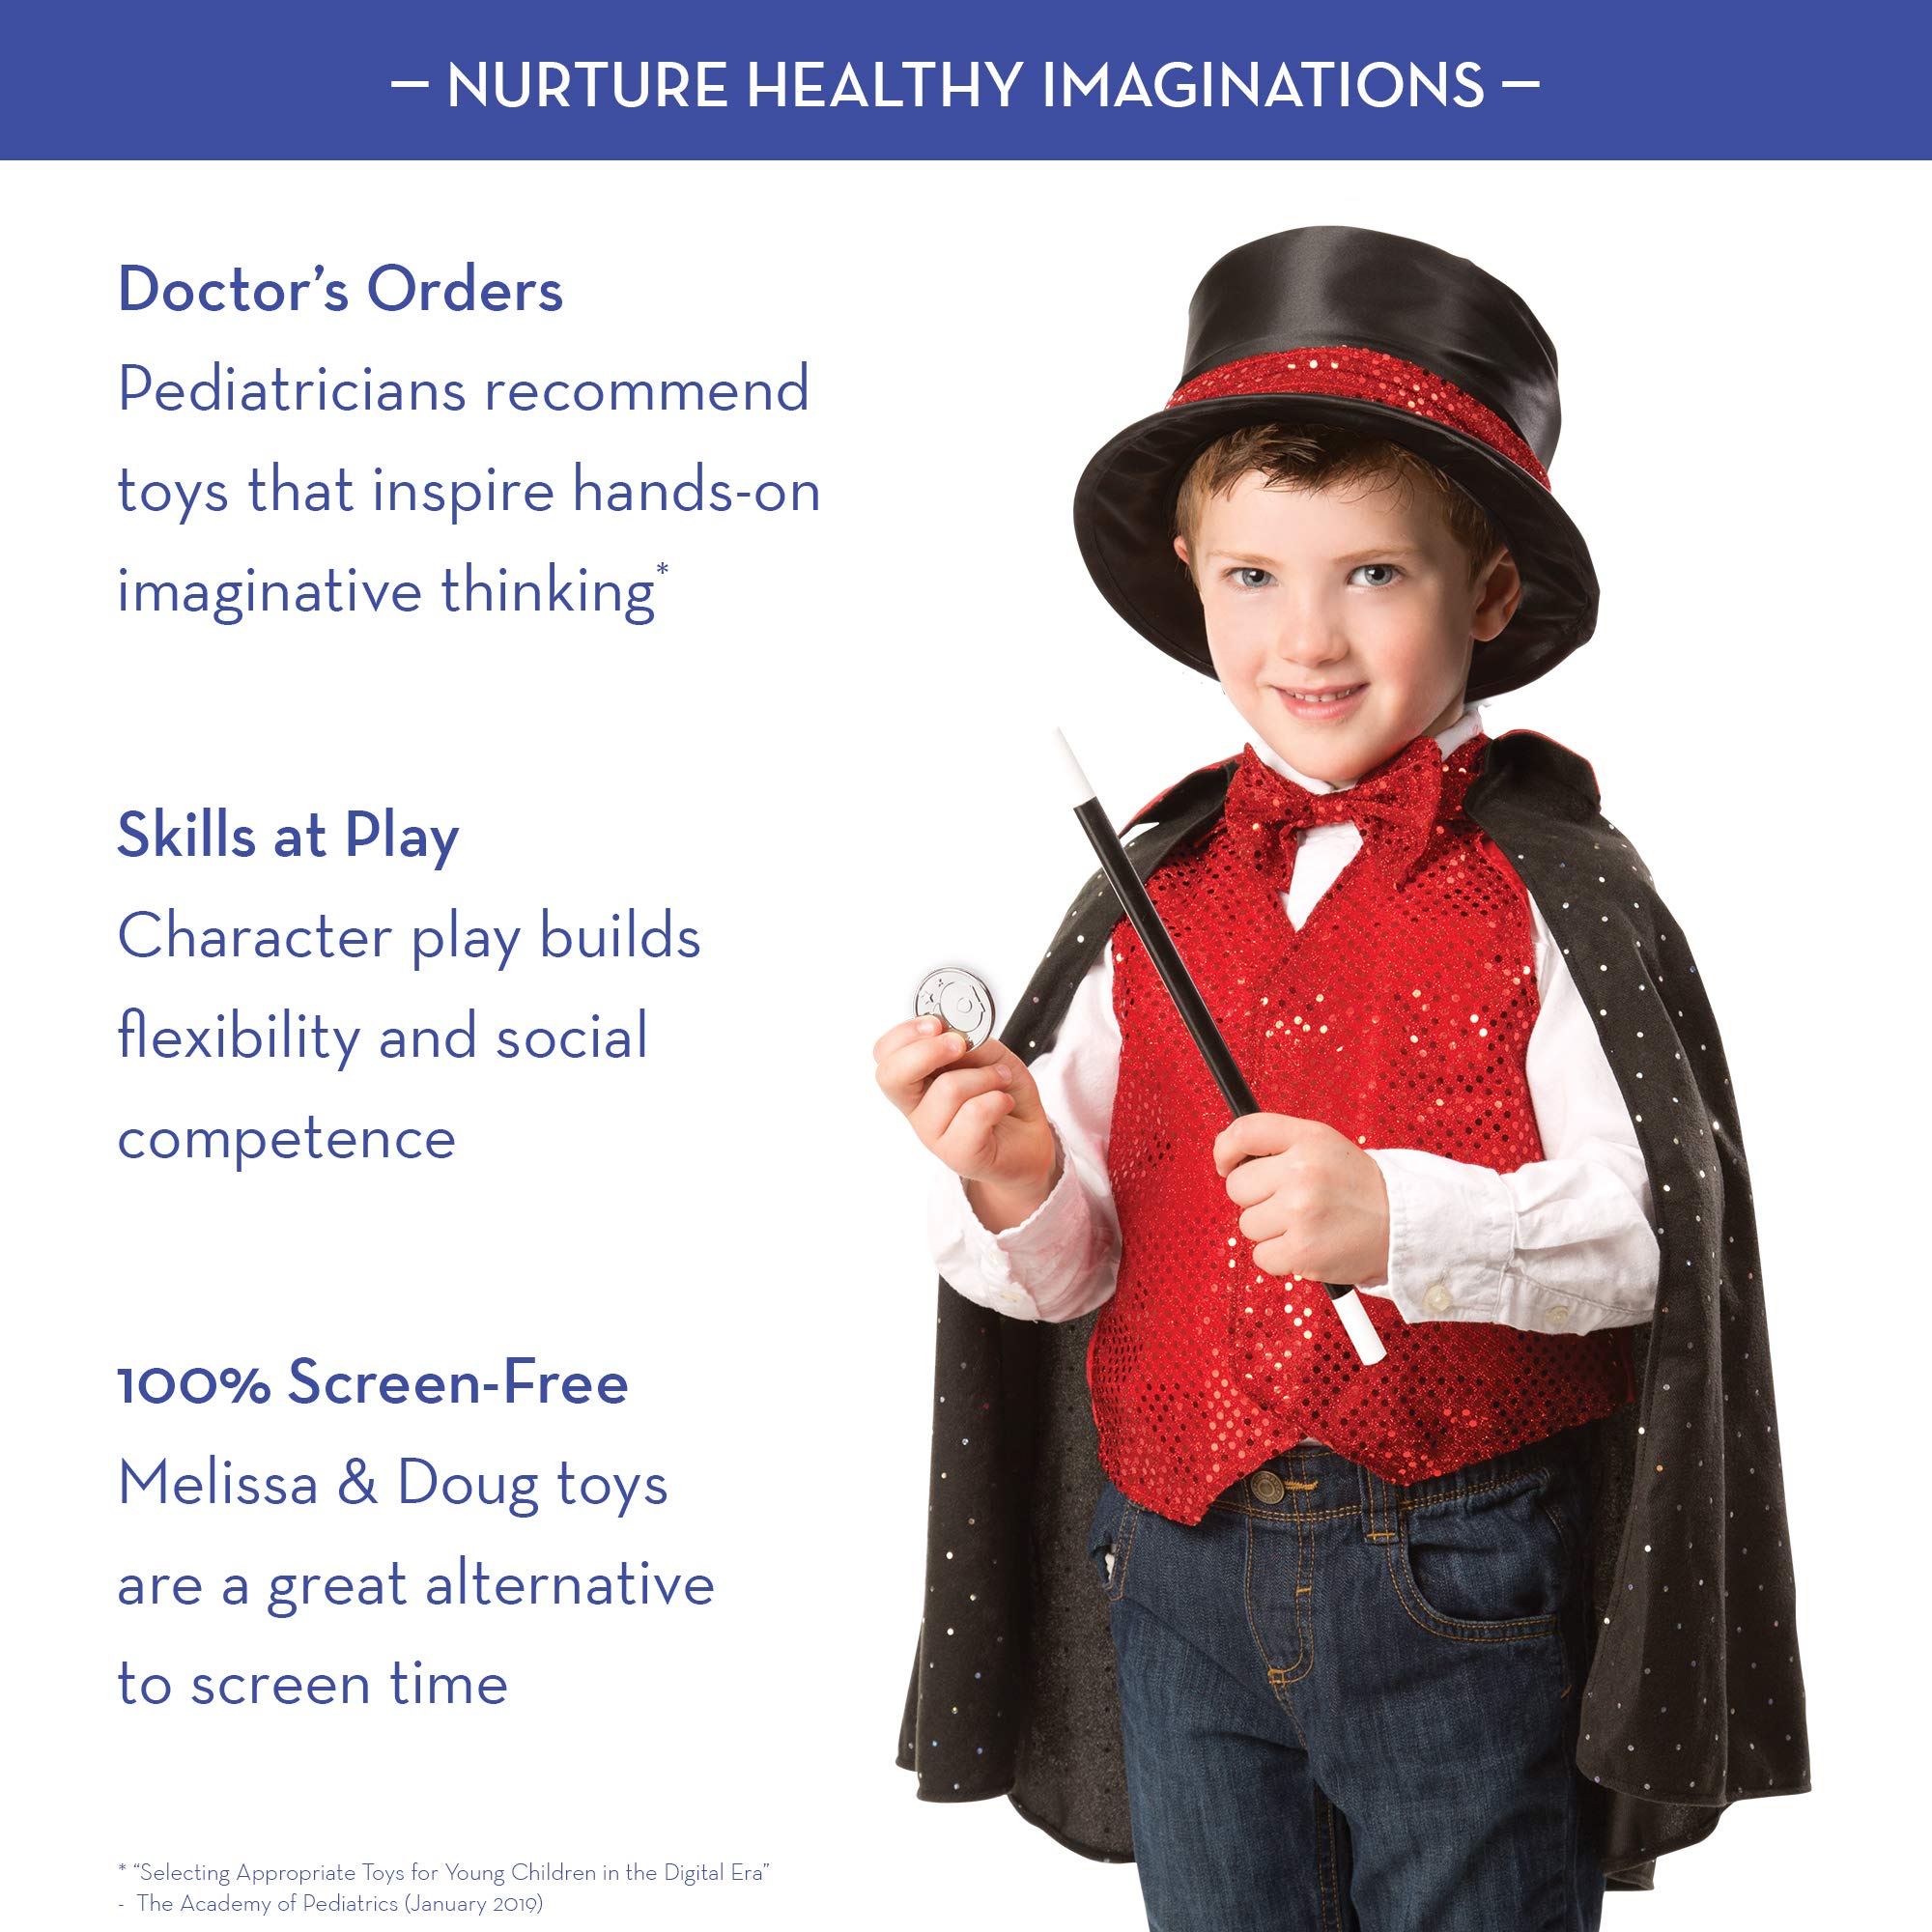 Melissa & Doug Magician Role Play Costume Set - Includes Hat, Cape, Wand, Magic Tricks Frustration-Free Packaging